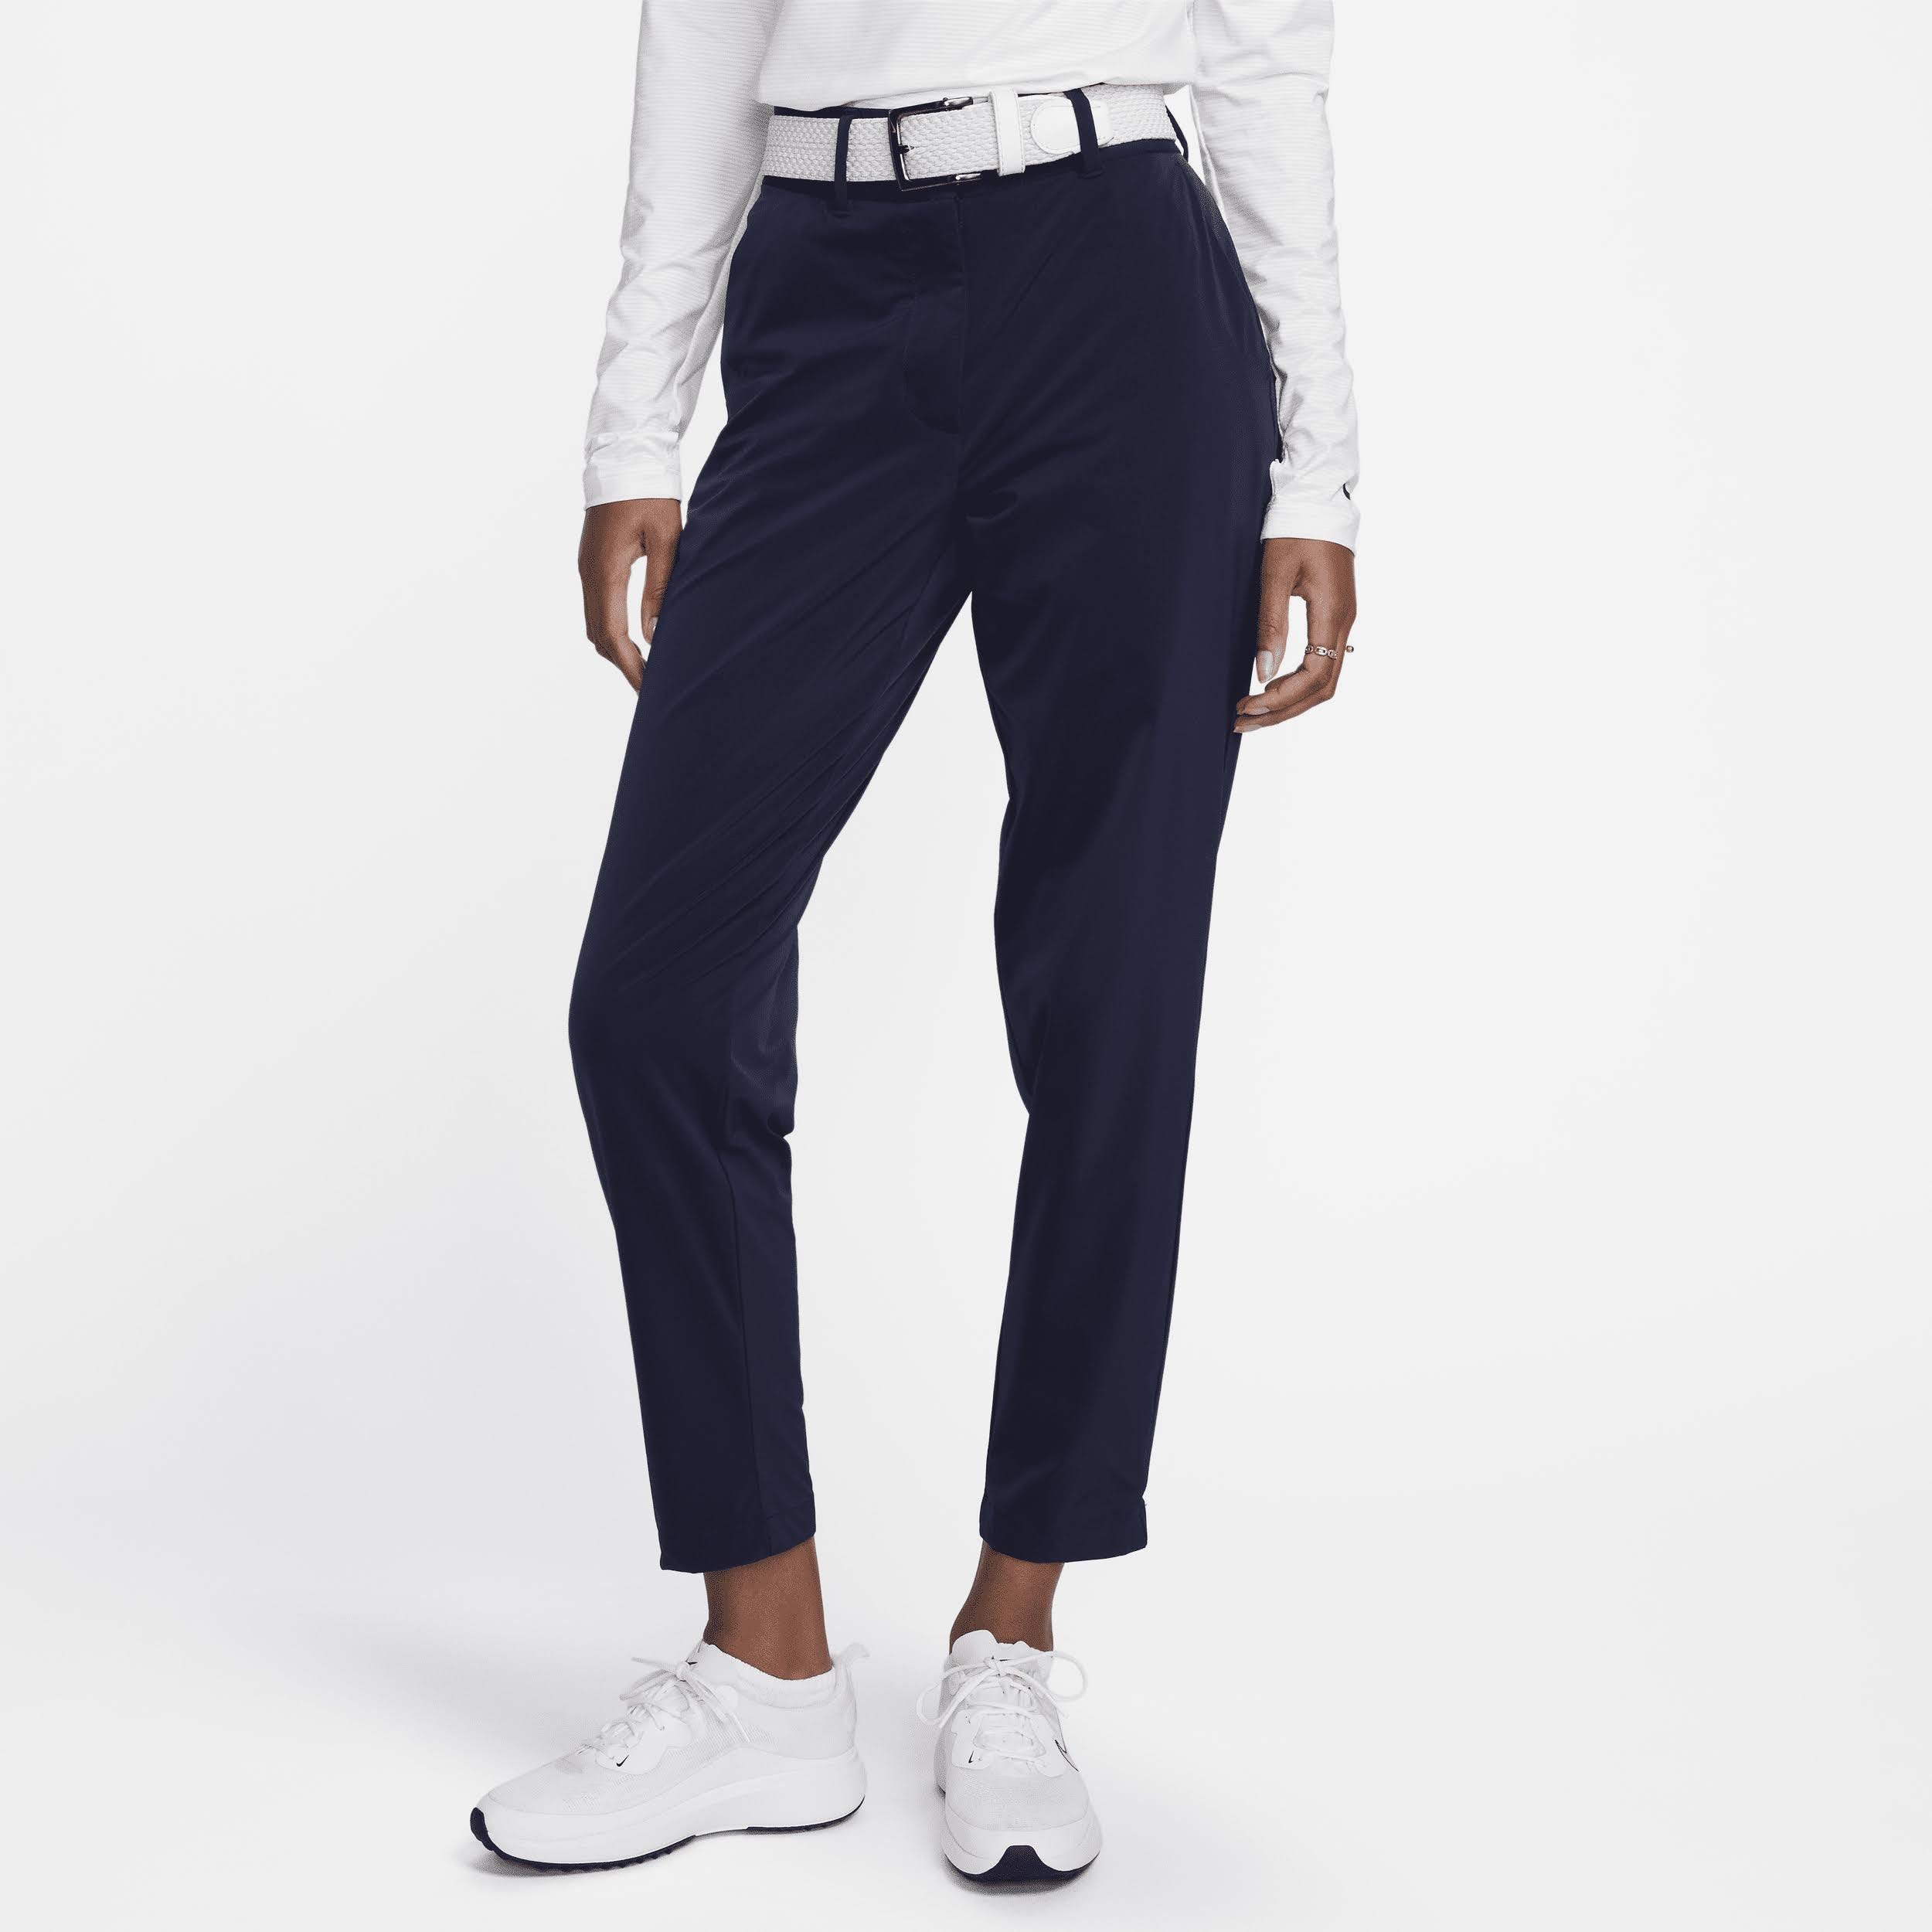 Nike Dry-Fit Tour Women's Golf Pants: Comfortable Fit and Style on the Course | Image